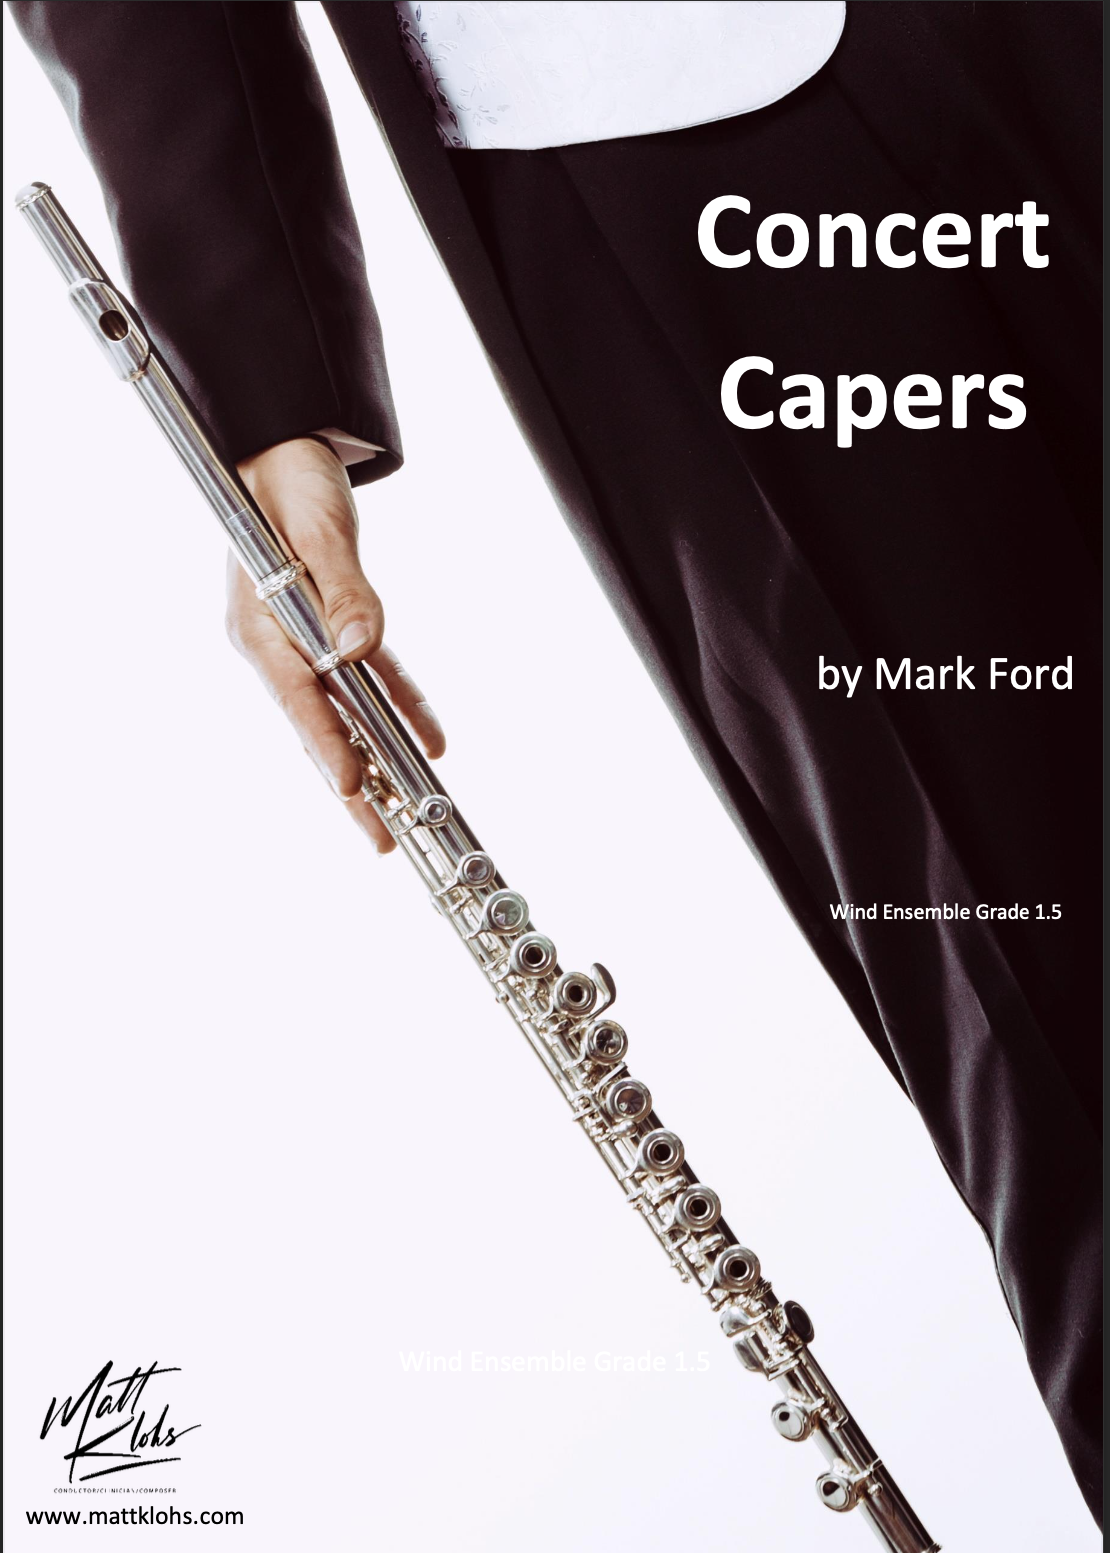 Concert Capers by Mark Ford